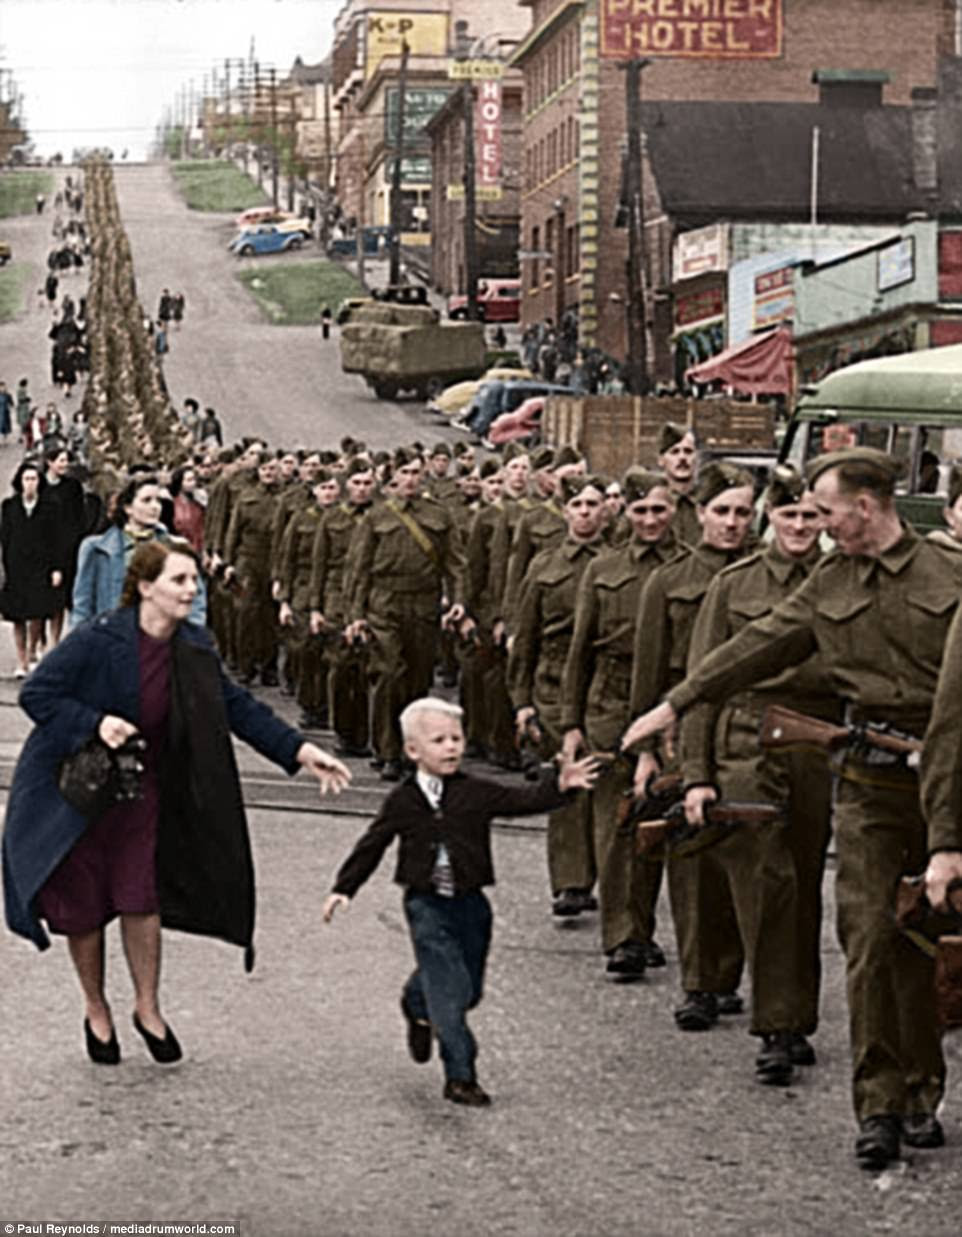 Warren Bernard, five, chases after his father Private Jack Bernard in New Westminster, British Columbia in 1940. The photo was taken before the US joined the war, as Canadian soldiers headed for England. Private Bernard returned home in 1945